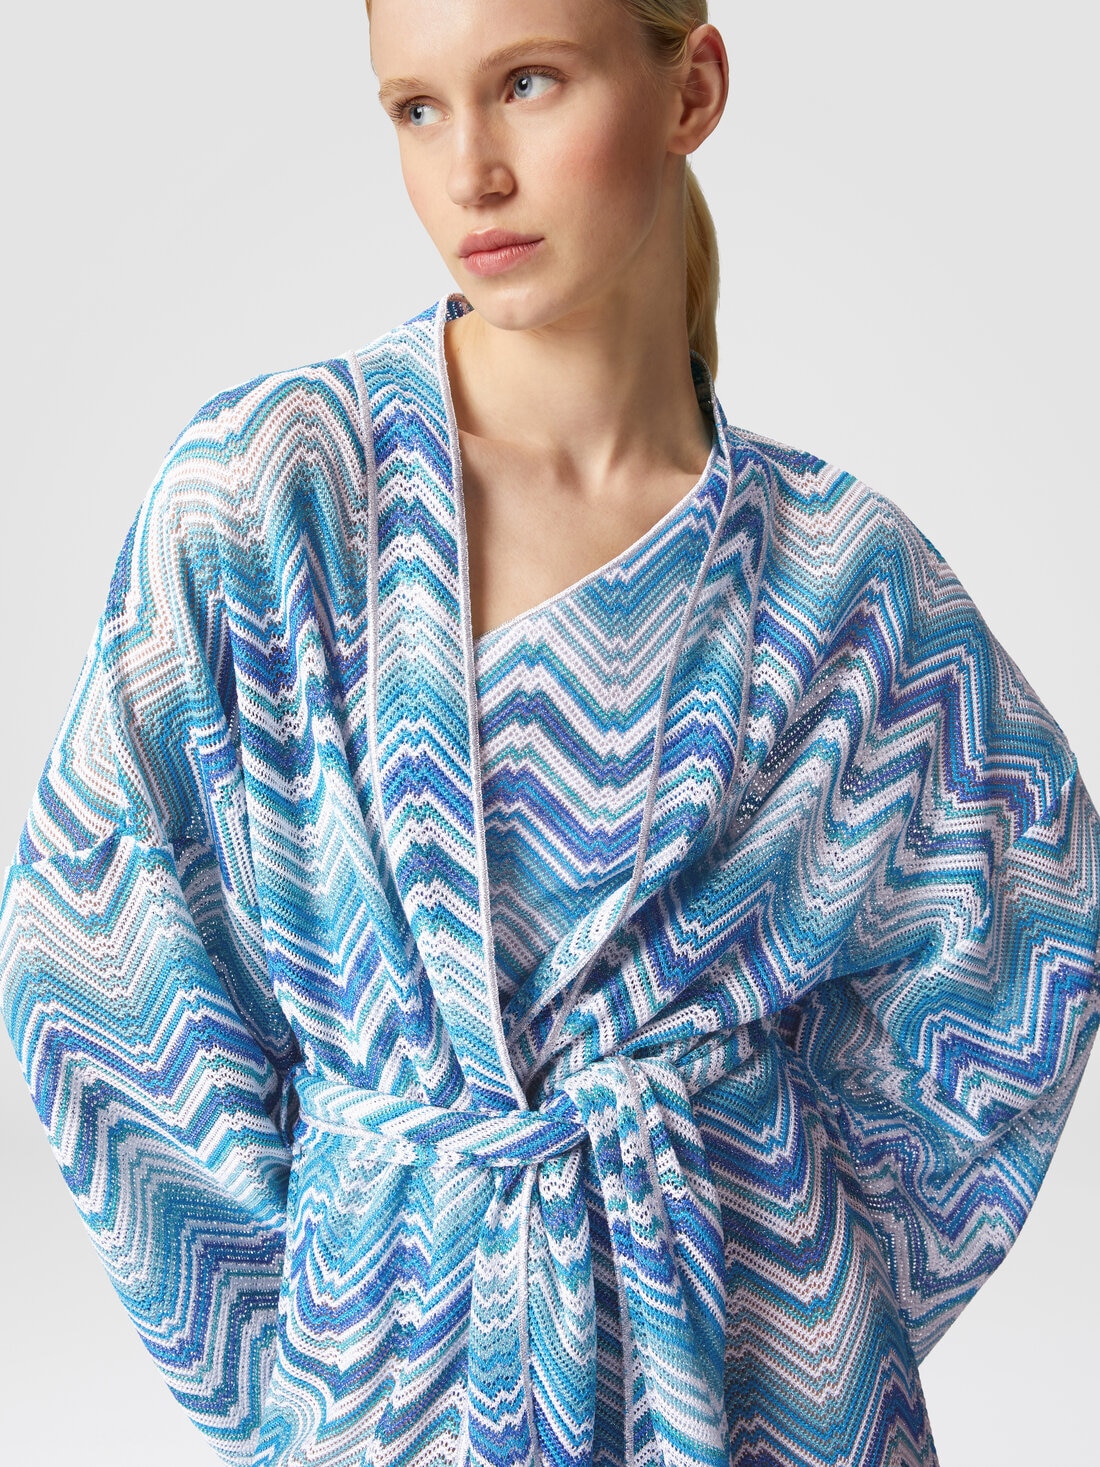 Short dressing gown cover-up in chevron crochet with lurex, Blue - MS24SQ0EBR00XKS72G5 - 3